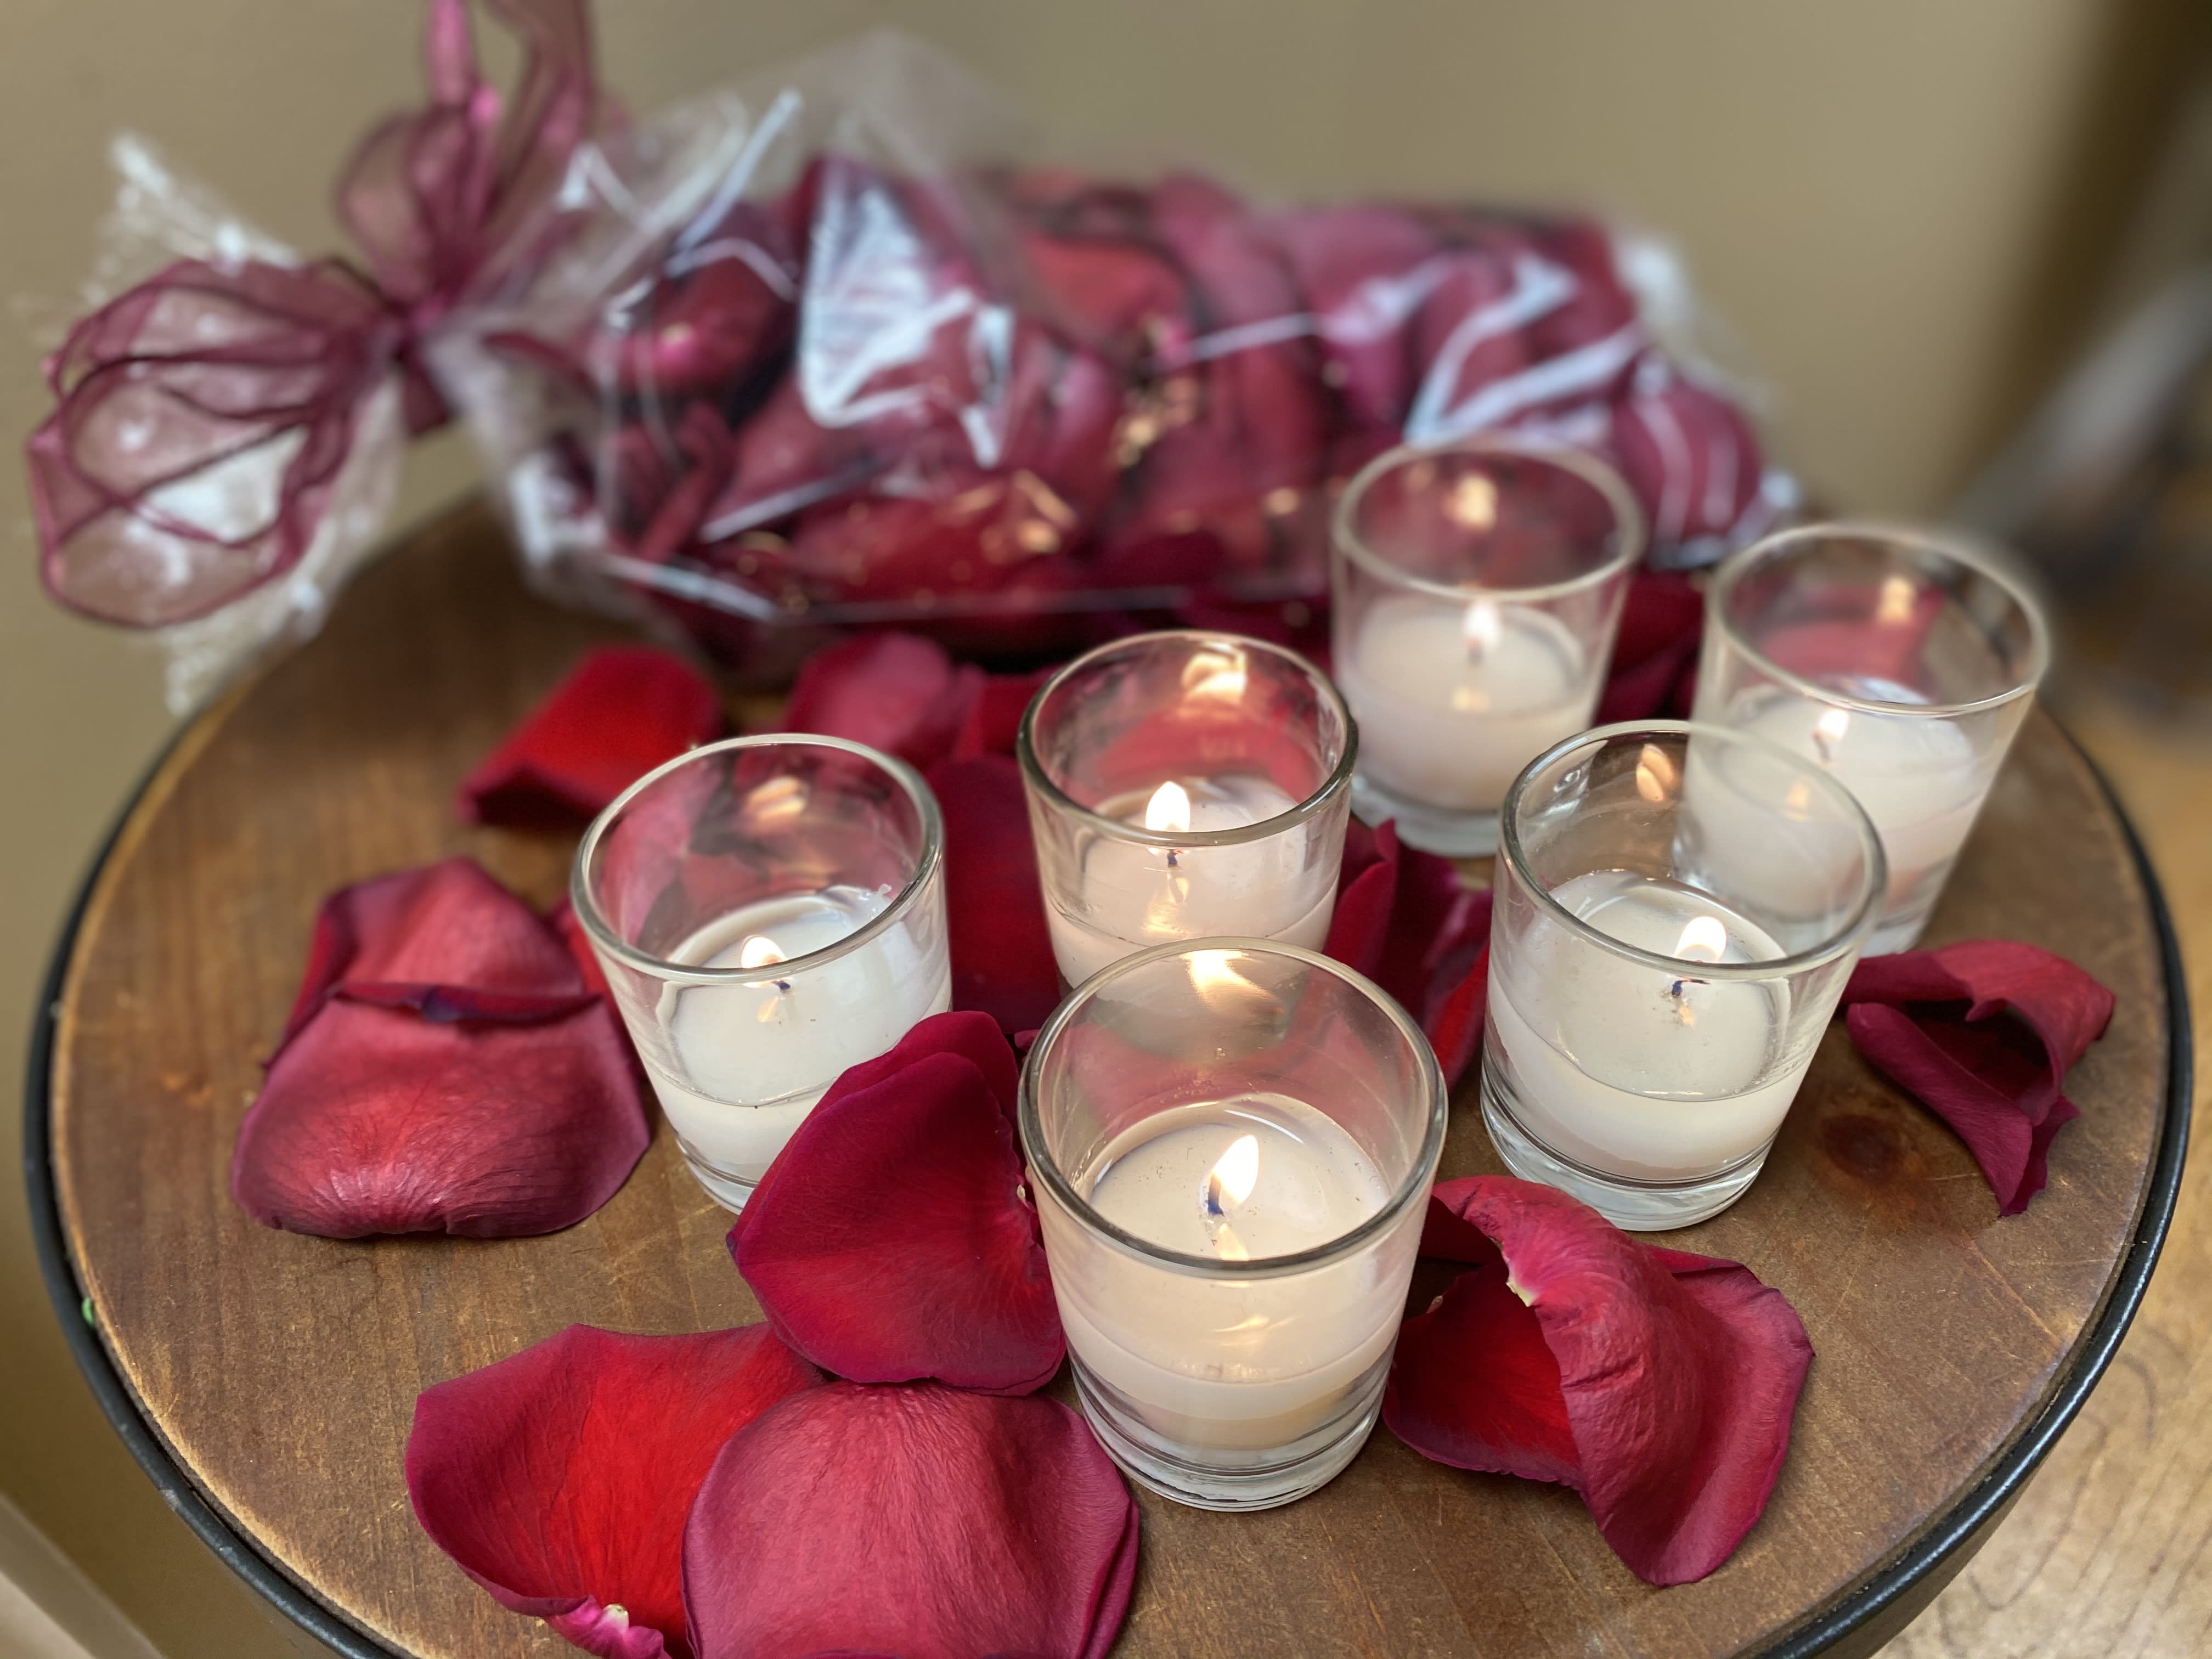 Add Romance With Fresh Rose Petals Candles Of Course In Cary Il Wildrose Floral Design